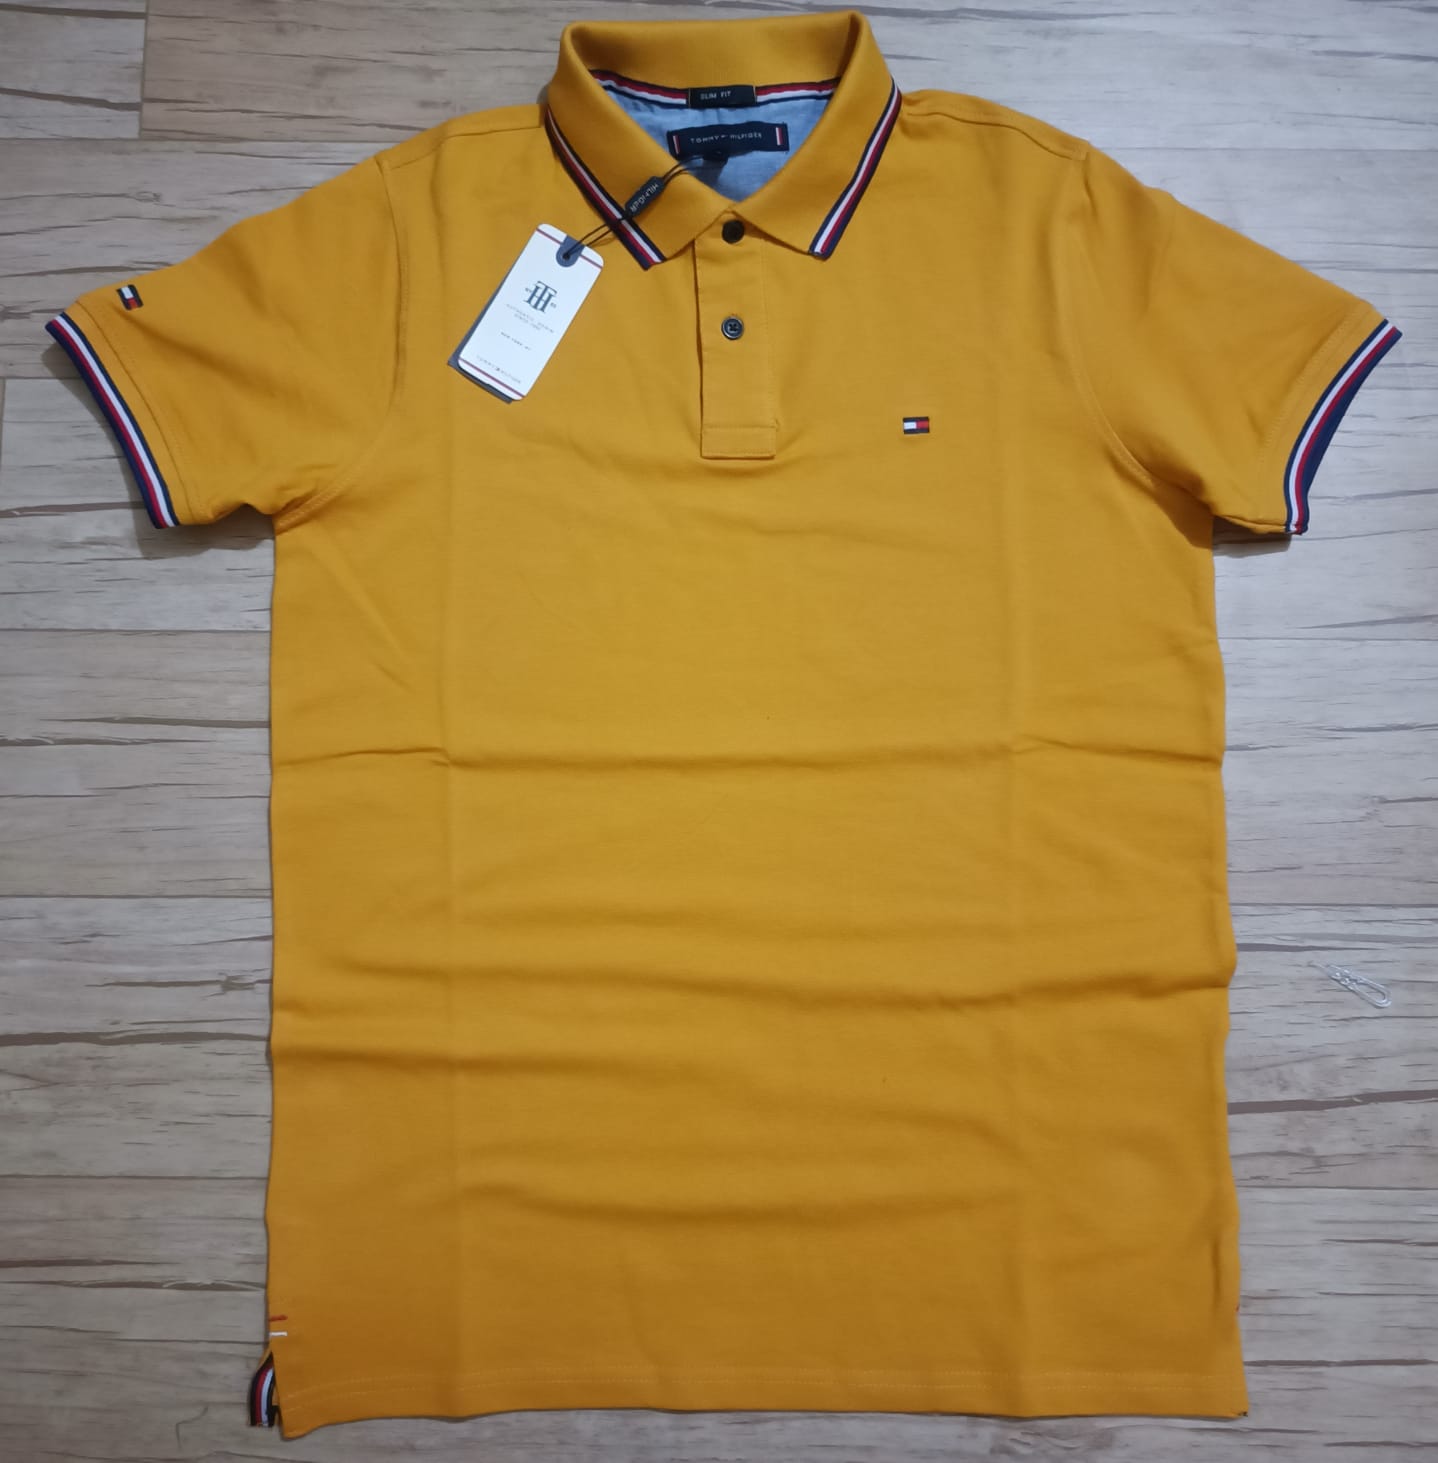 Imported Super Premium Cotton Polo Shirt For Men (ZAYSIPS15) - Yellow